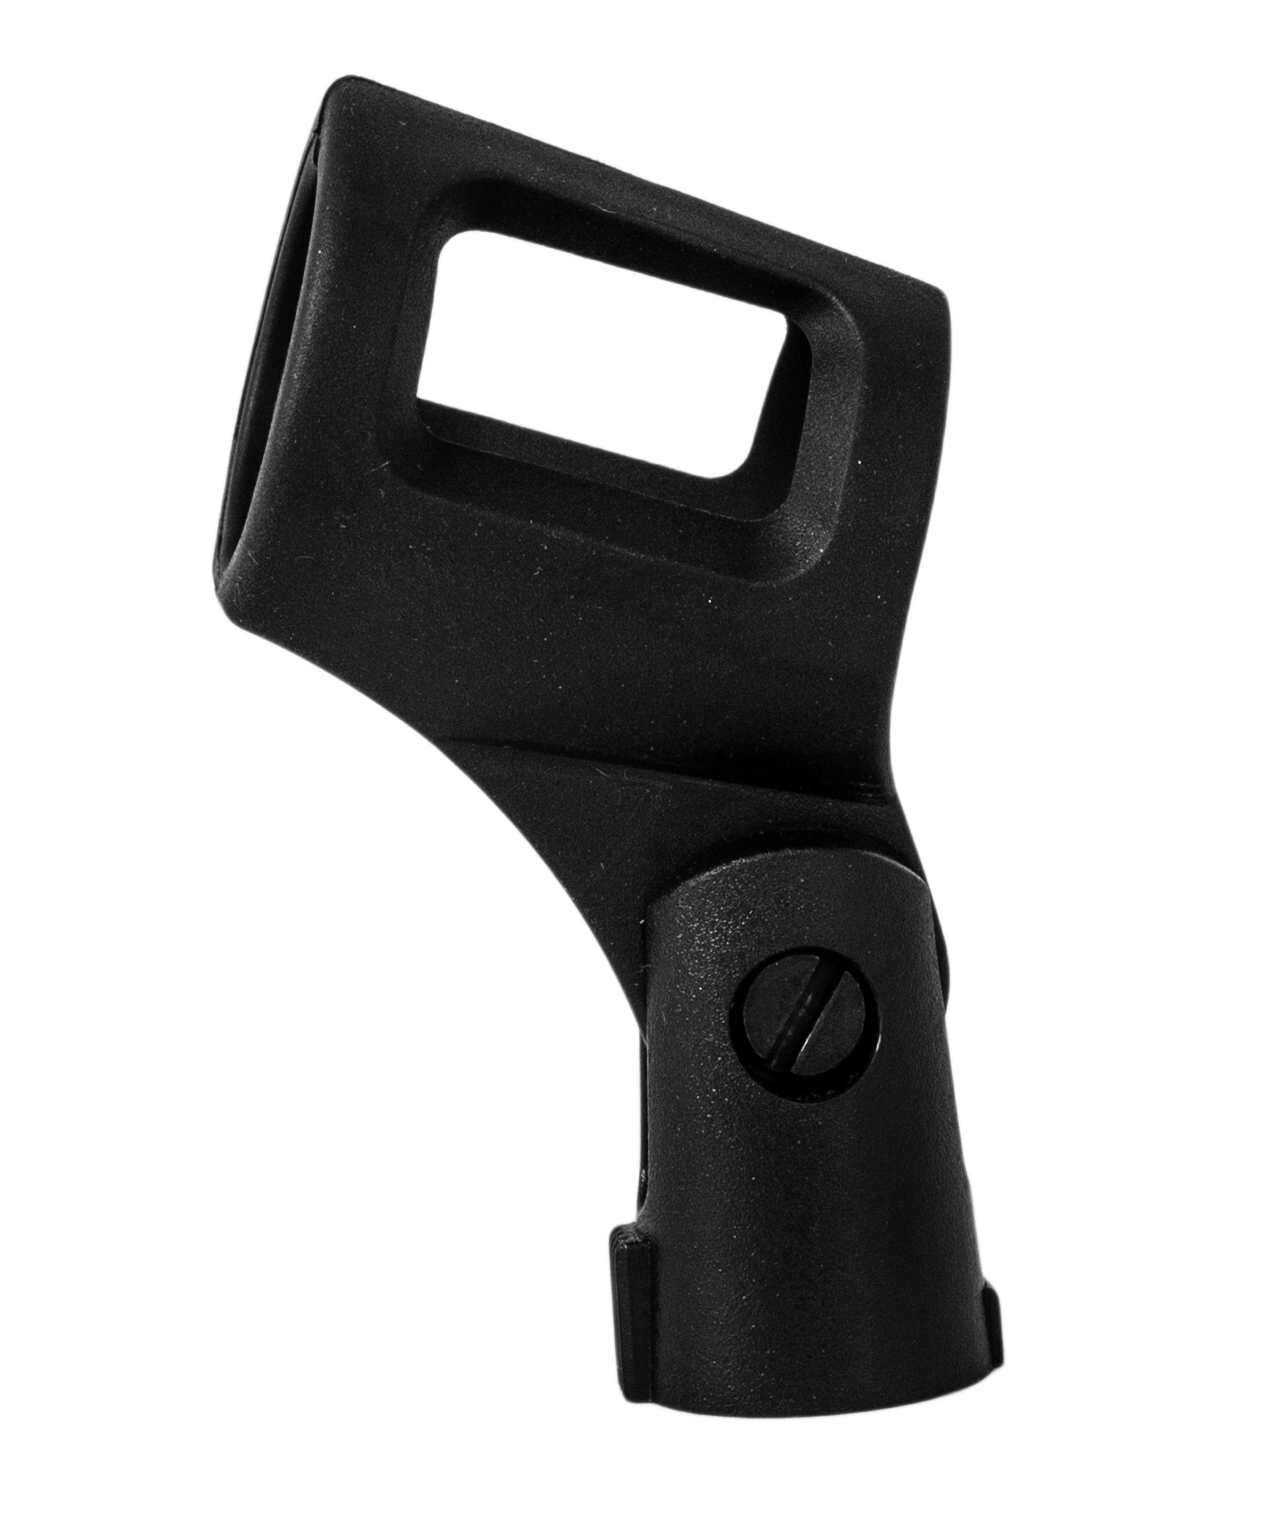 Nomad NMC-J802 Soft Rubber Microphone Clip